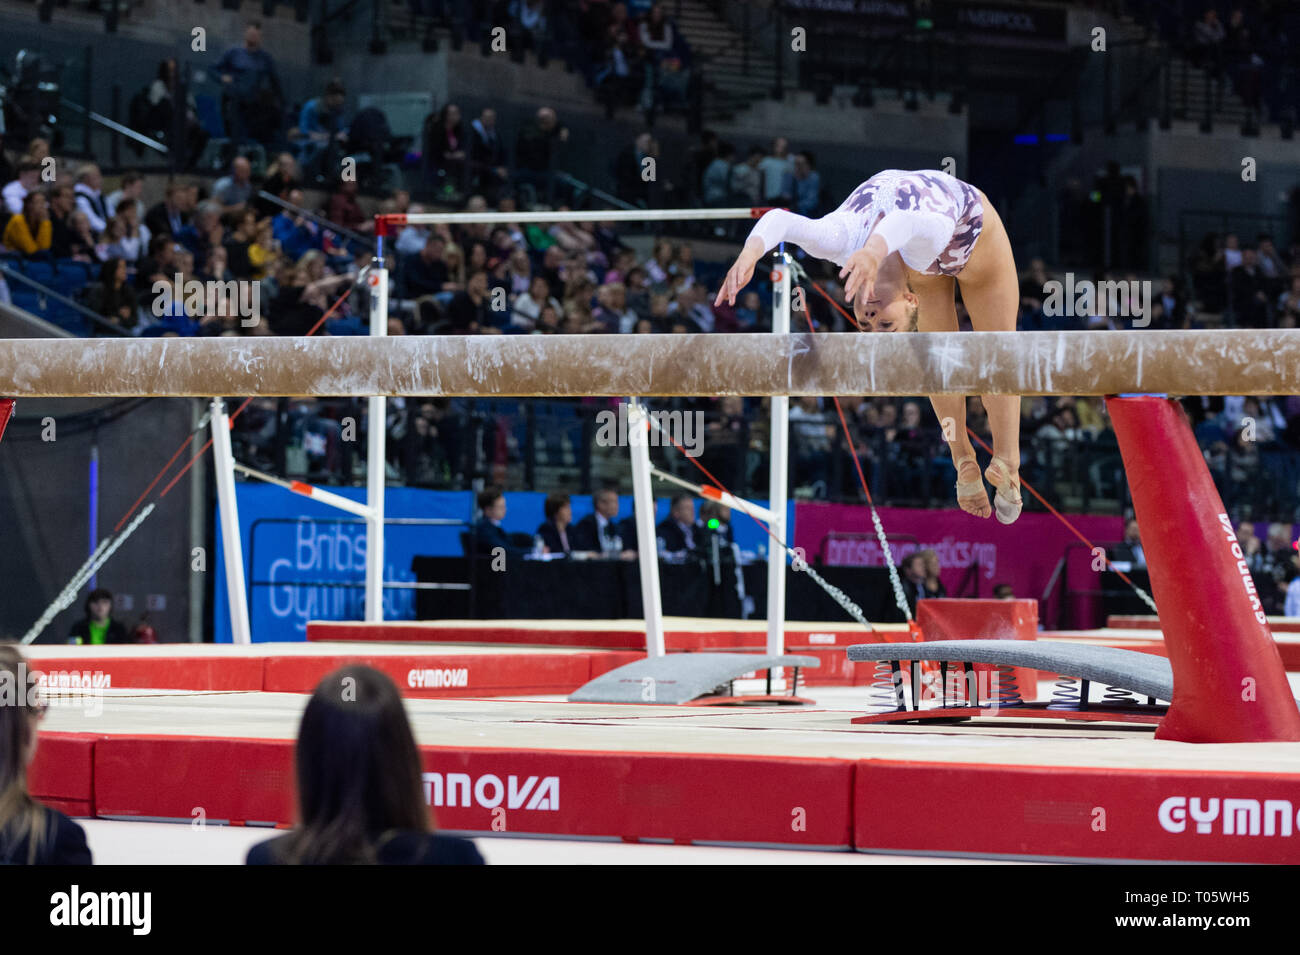 Liverpool, UK. 17th March 2019. Halle Hilton of South Essex Gymnastics competing at the Men’s and Women’s Artistic British Championships 2019, M&S Bank Arena, Liverpool, UK. Credit: Iain Scott Photography/Alamy Live News Stock Photo